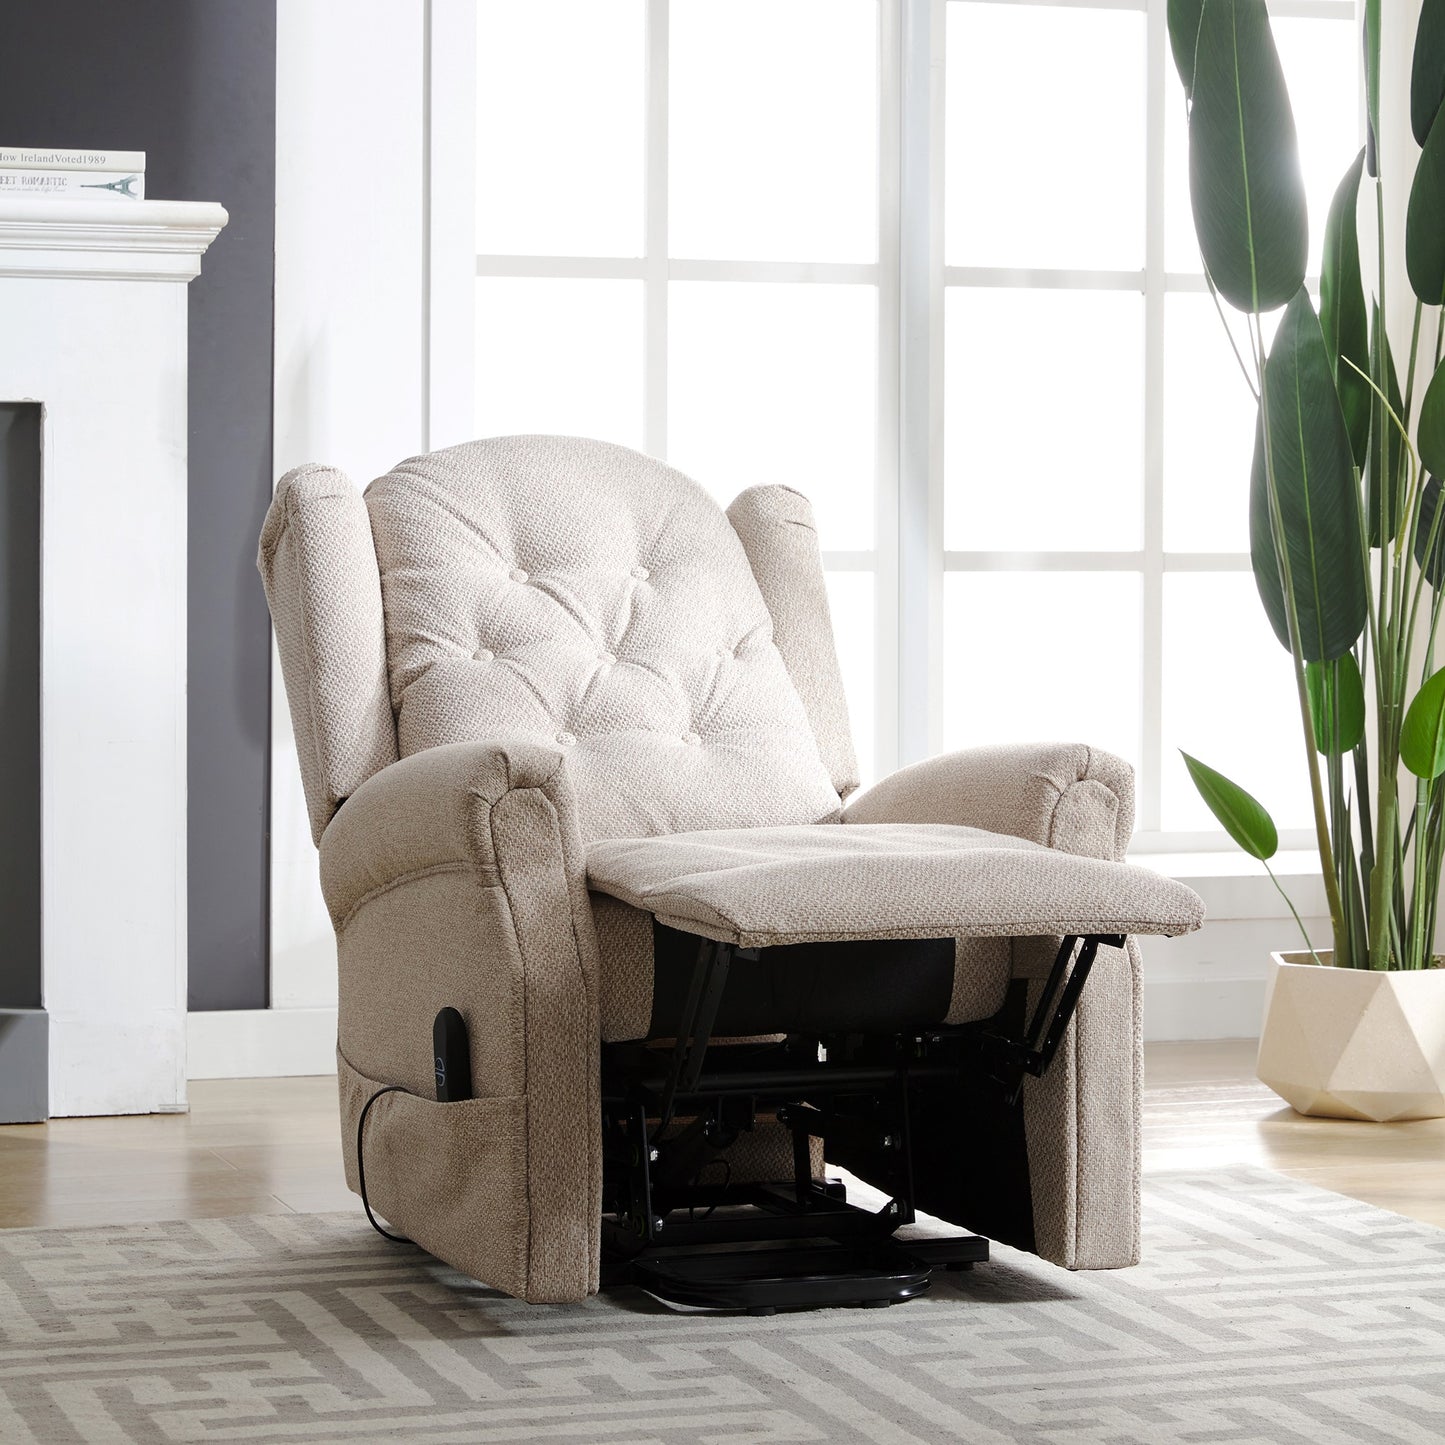 Gosford electric riser recliner with massage and heat